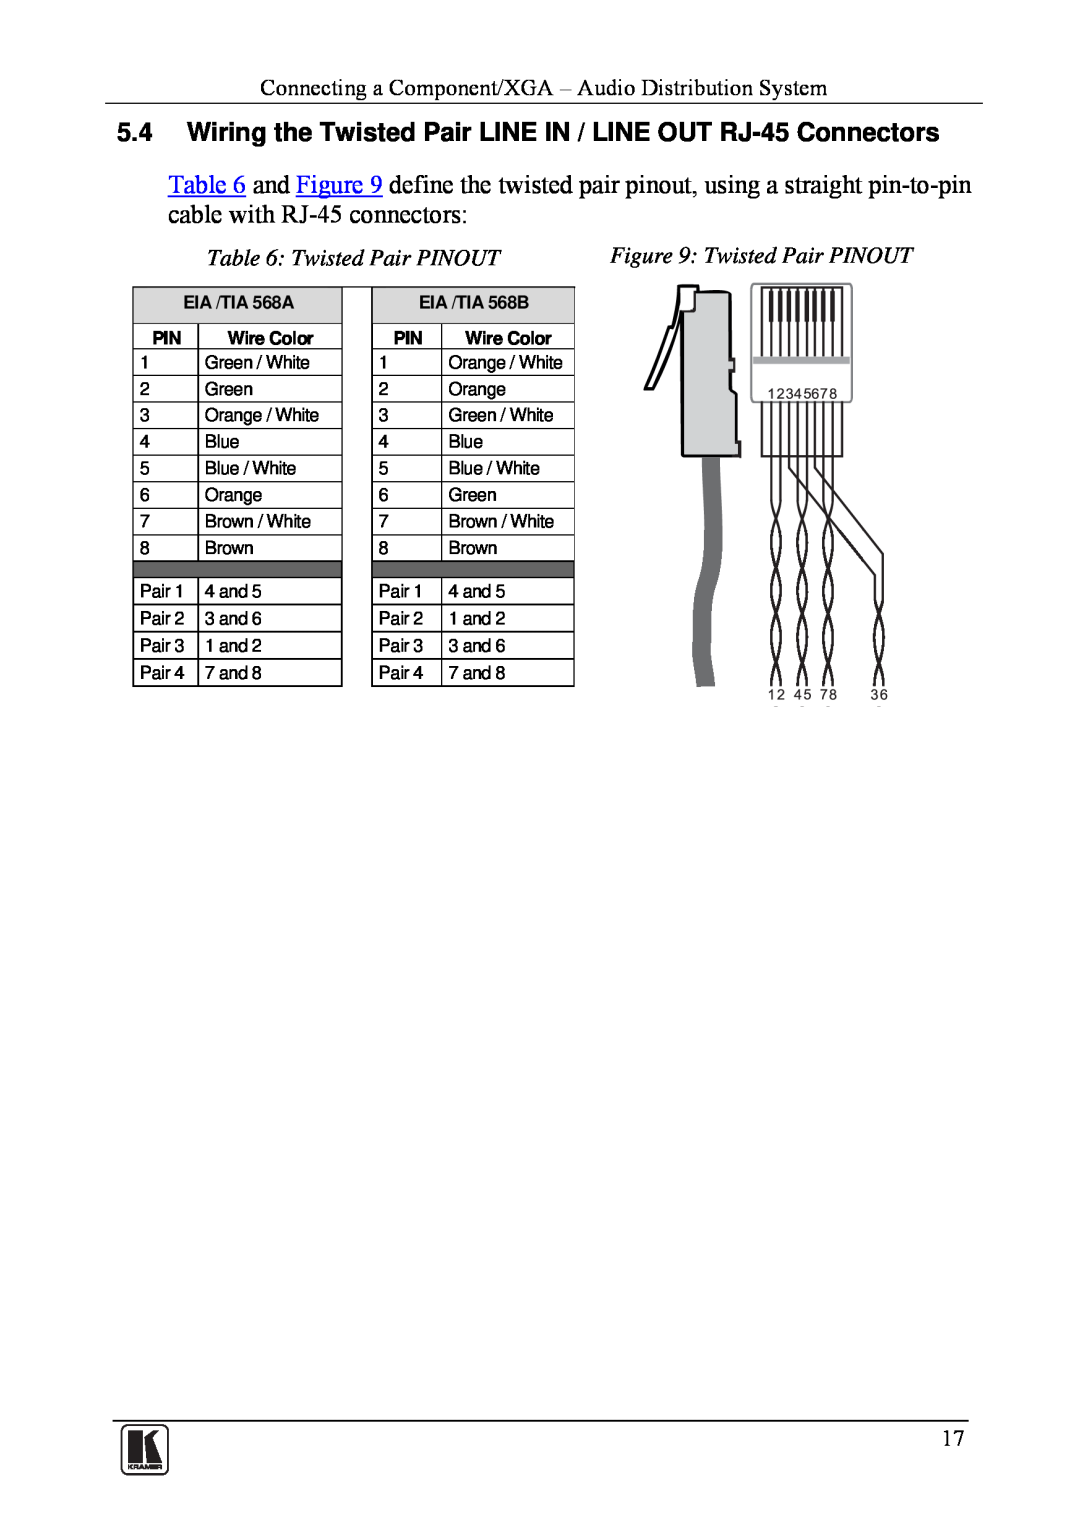 Kramer Electronics TP-45 Wiring the Twisted Pair LINE IN / LINE OUT RJ-45 Connectors, Twisted Pair PINOUT, EIA /TIA 568A 